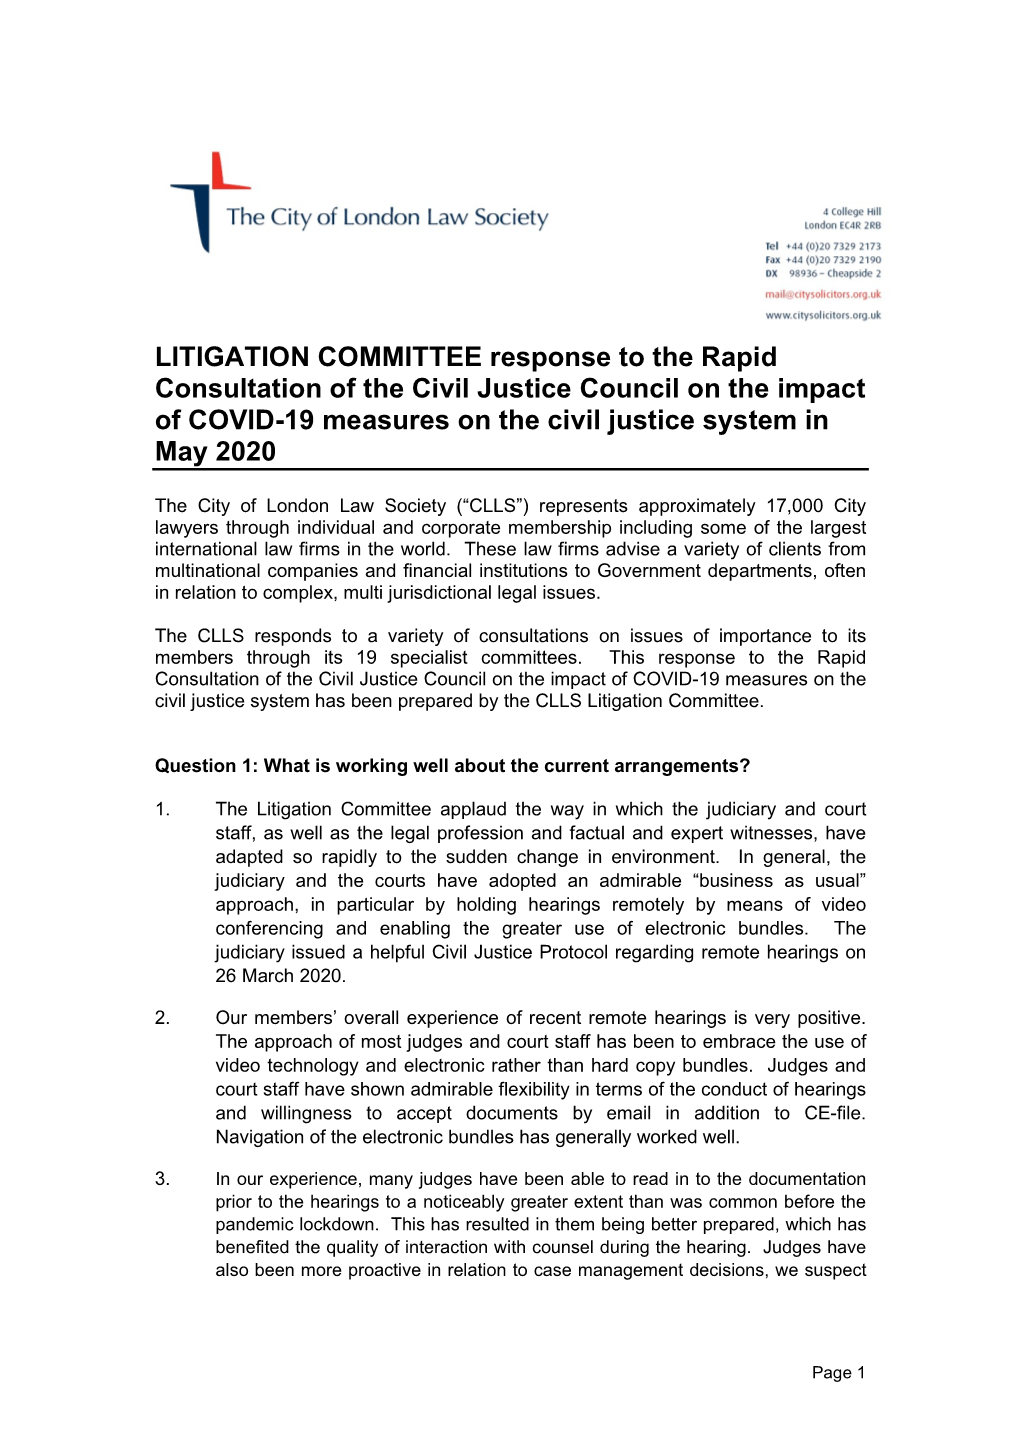 LITIGATION COMMITTEE Response to the Rapid Consultation of the Civil Justice Council on the Impact of COVID-19 Measures on the Civil Justice System in May 2020